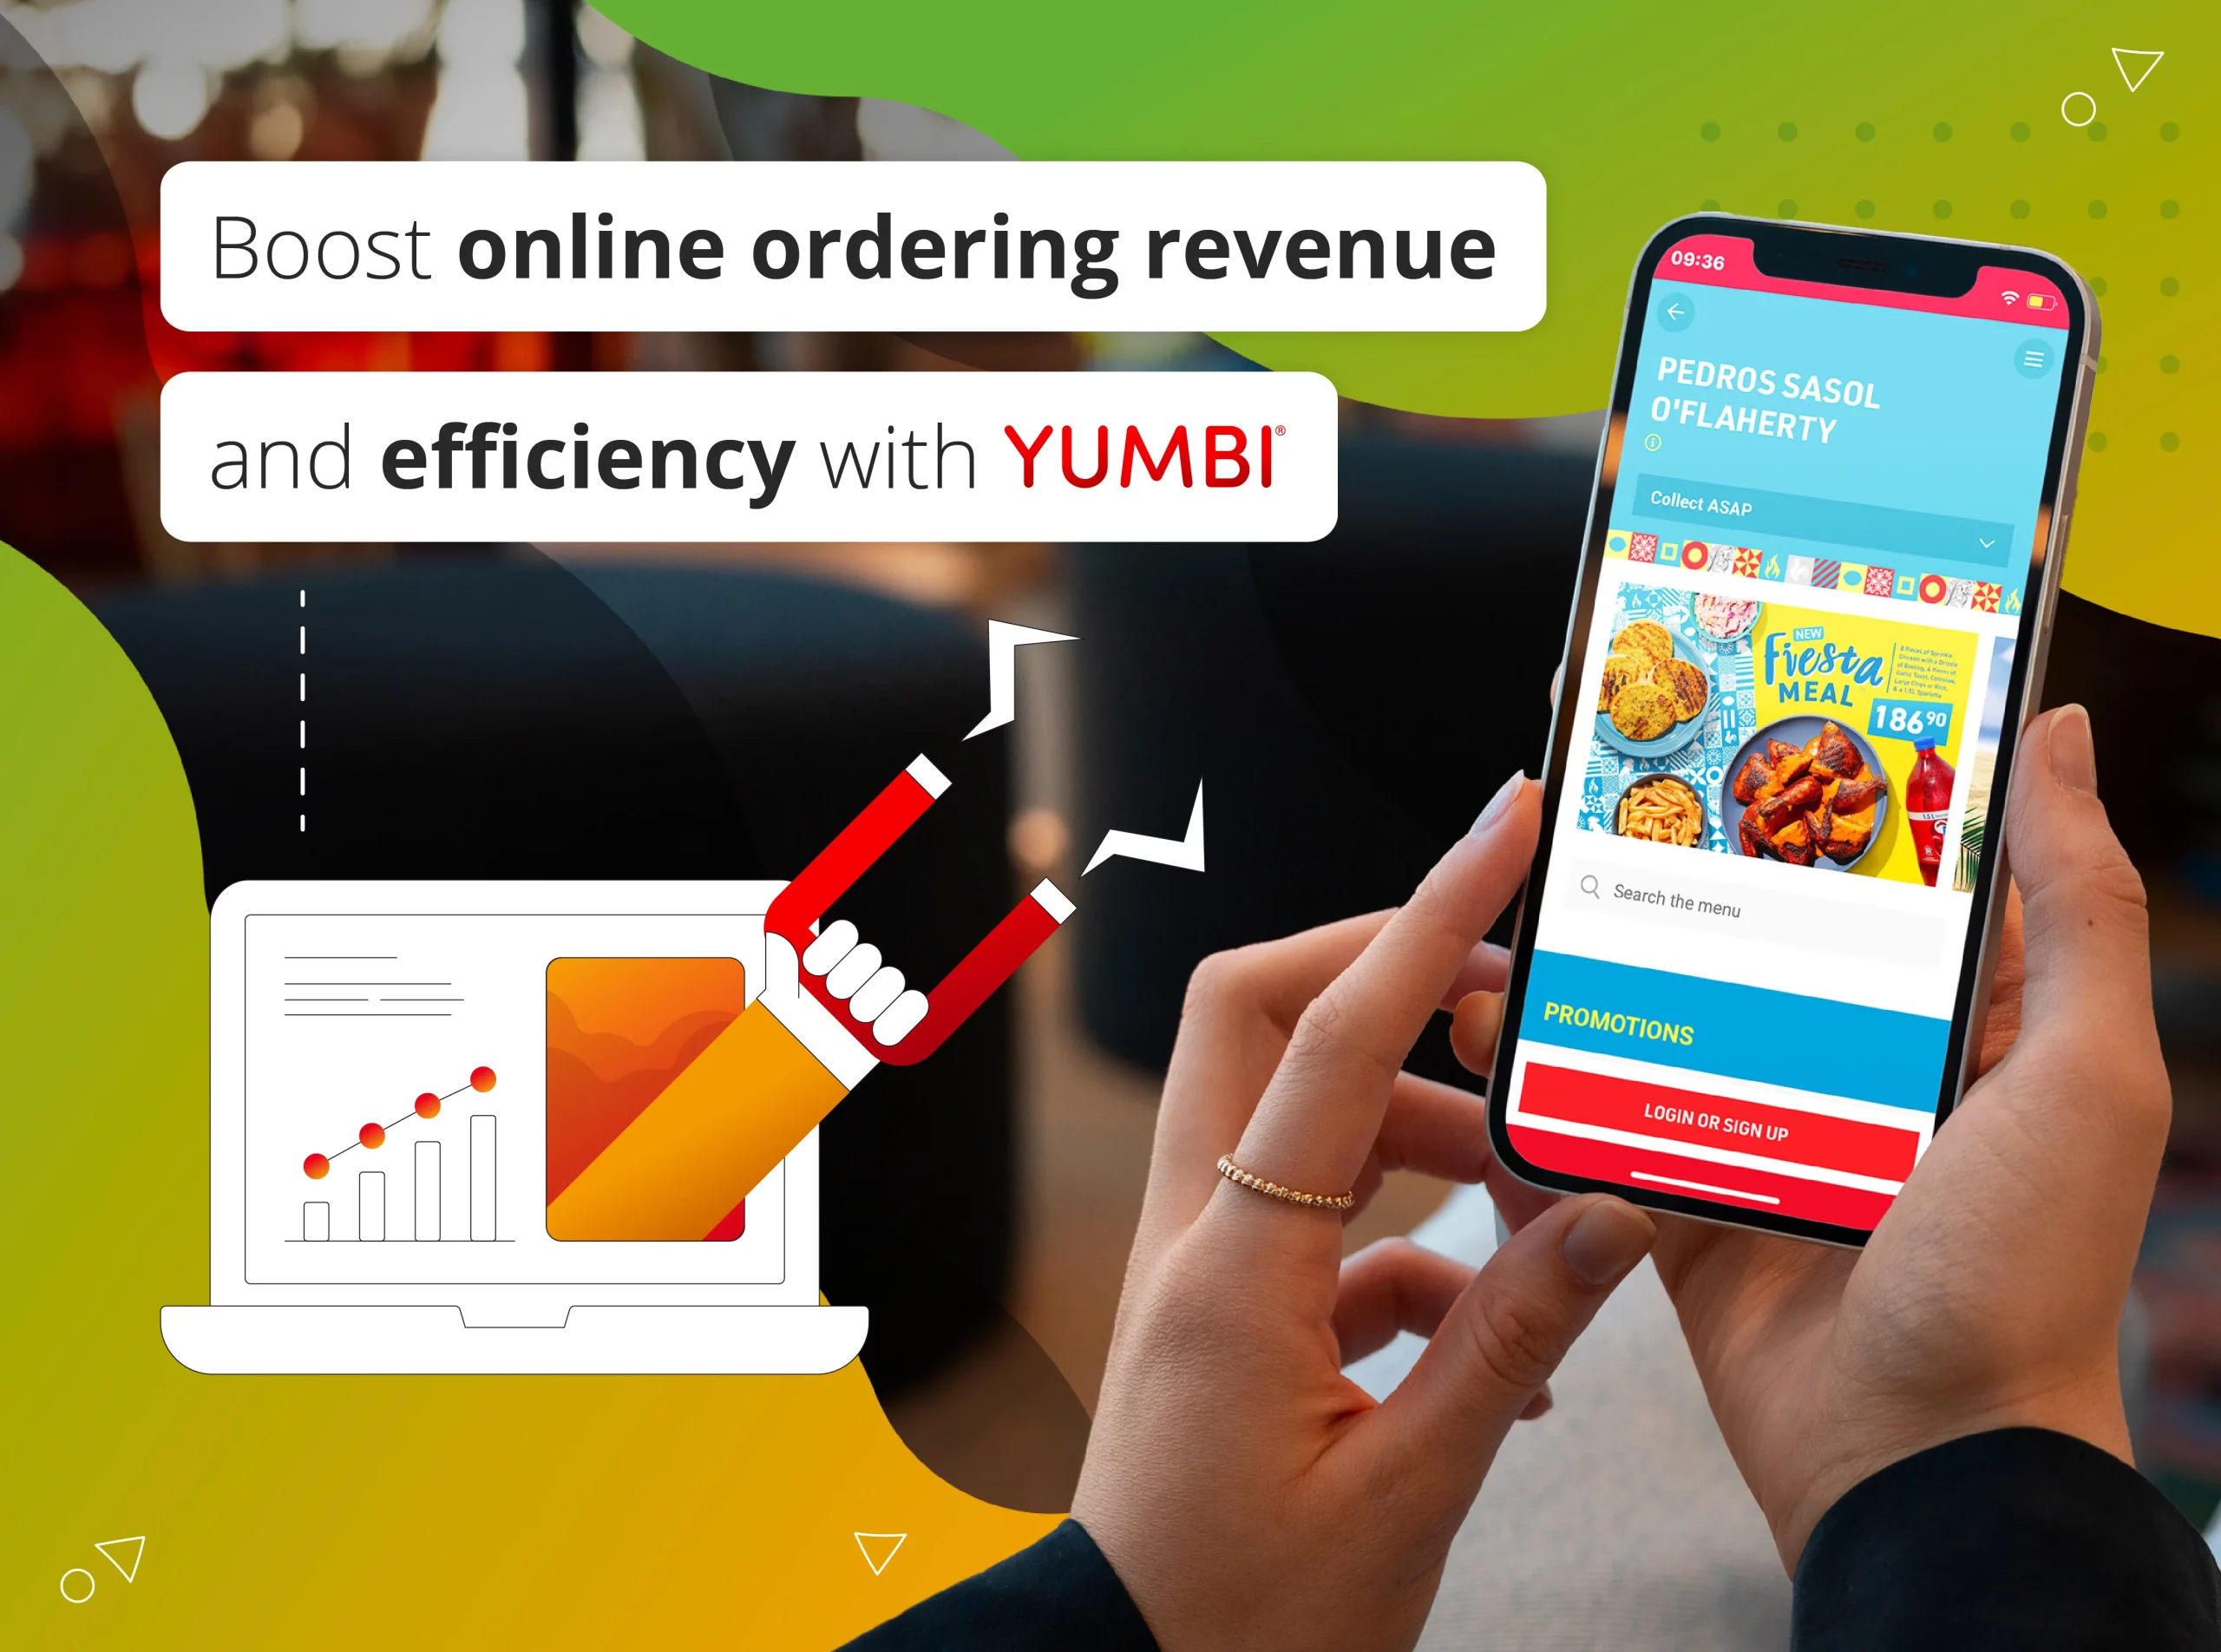 Boost online ordering revenue and efficiency with YUMBI